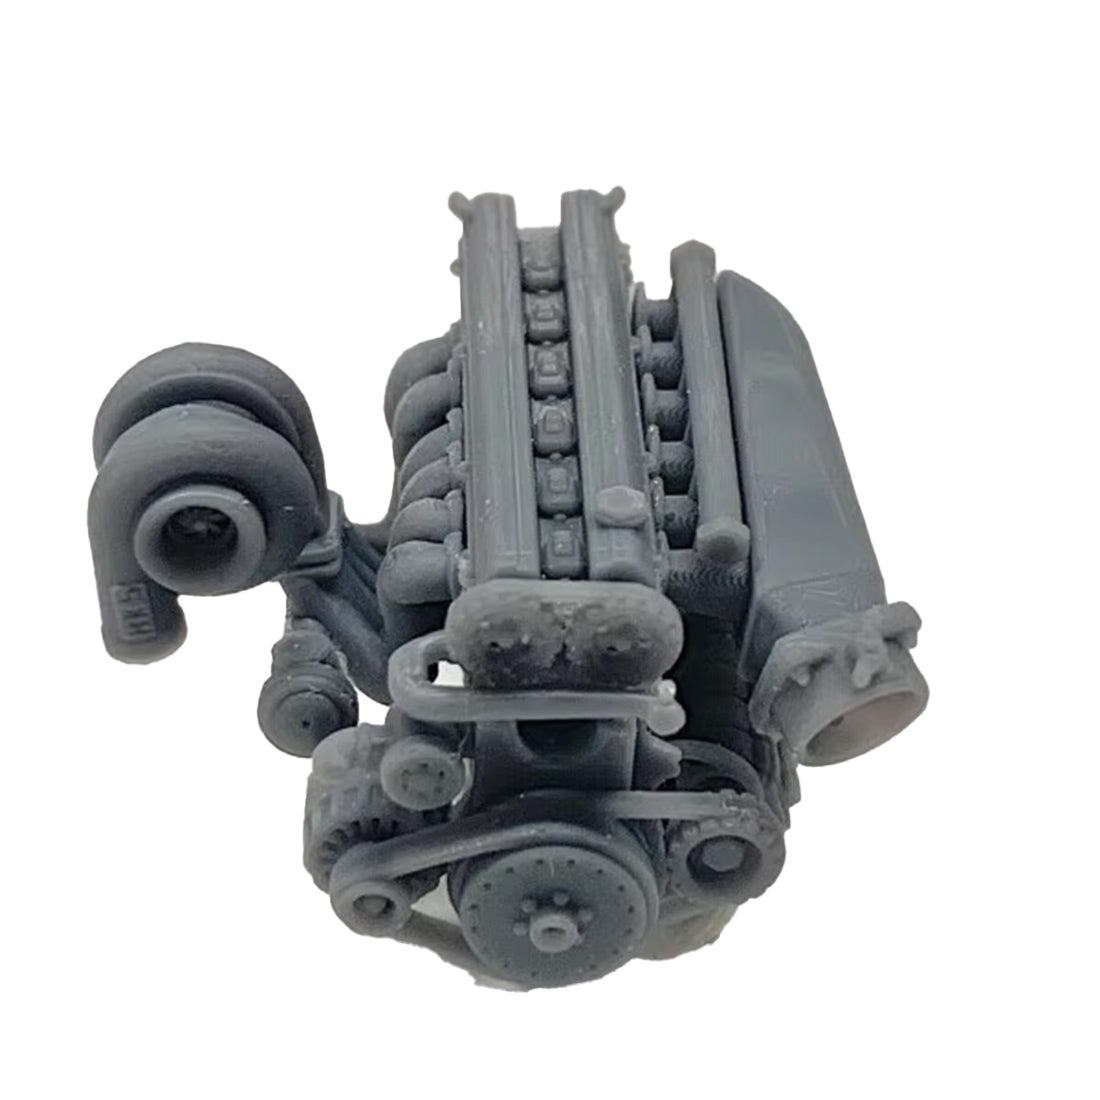 3D Printed Inline Mini Four-cylinder Engine Model Set 1/24 Scale 35PCS (Reference Toyota 2JZ Engine)